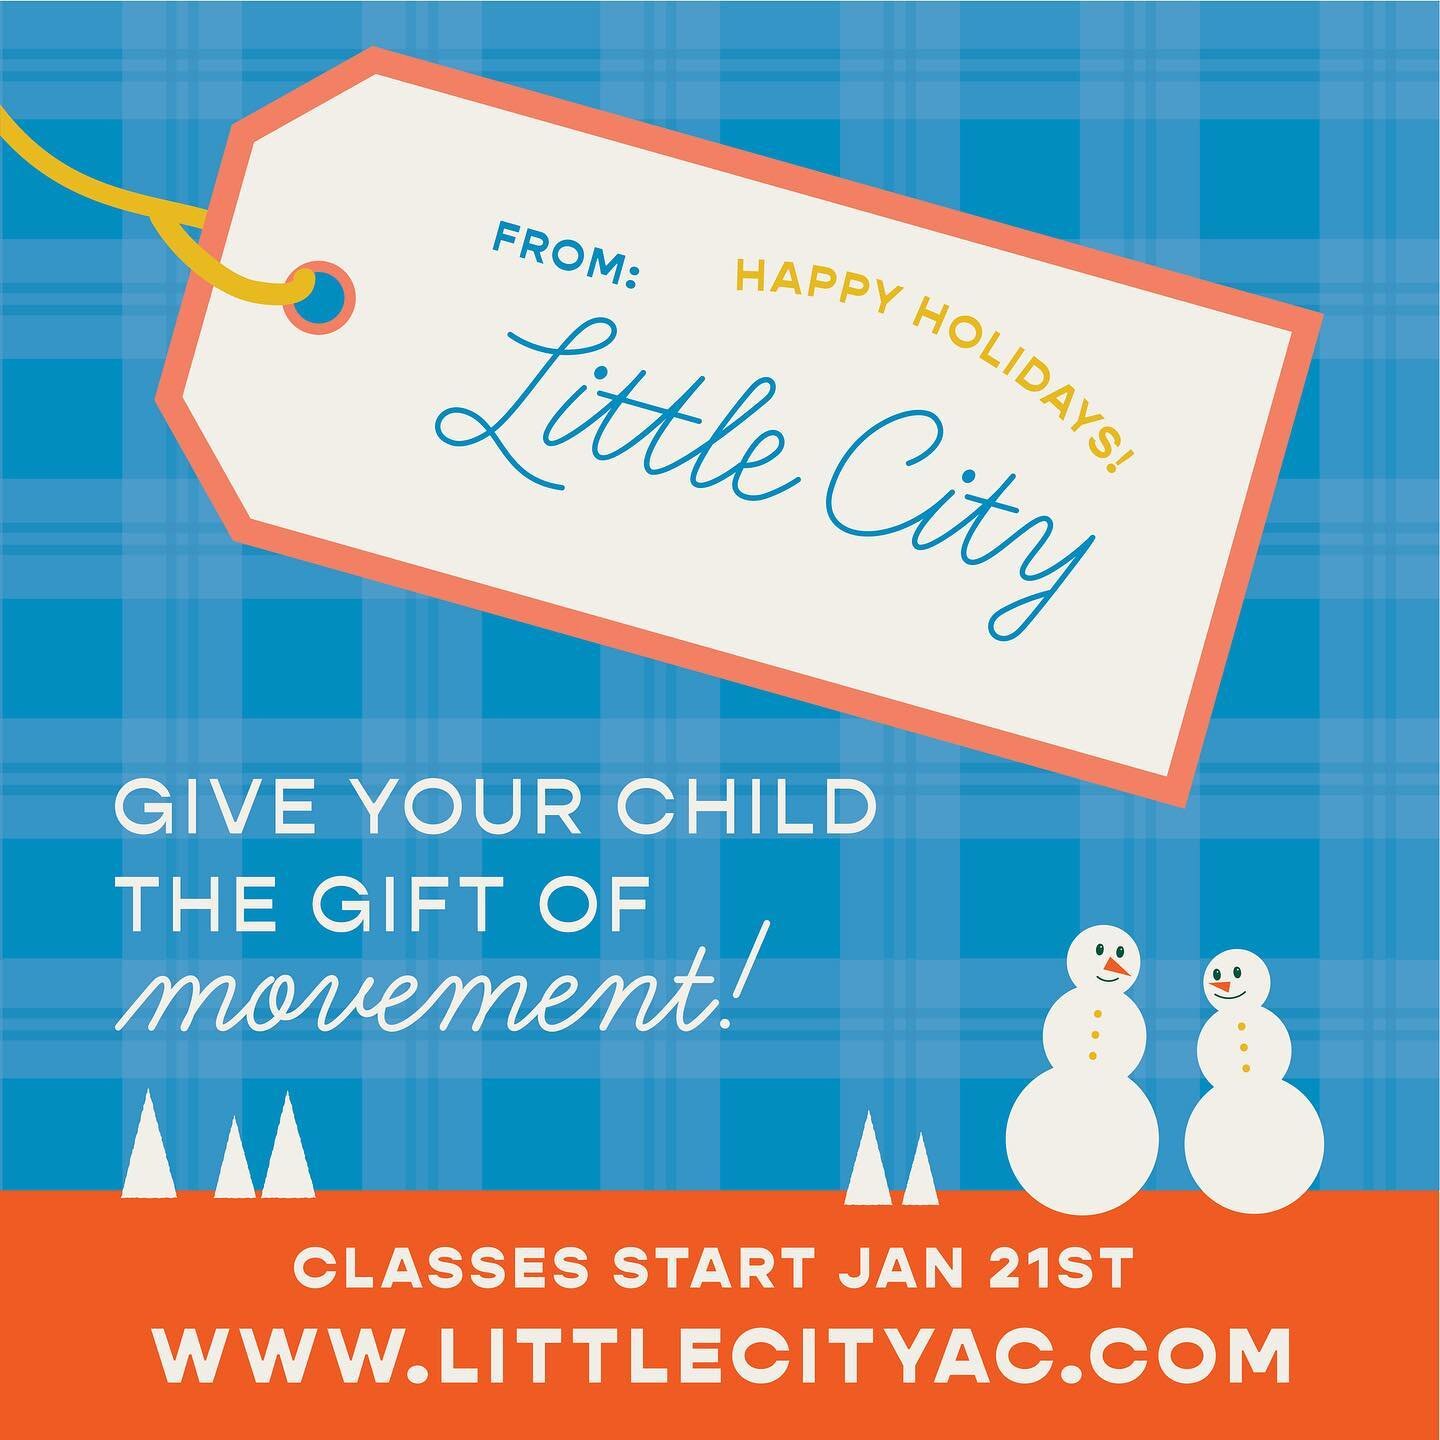 Winter session registration is open! Sign up at LittleCityAC.com!⛄️ ⛄️